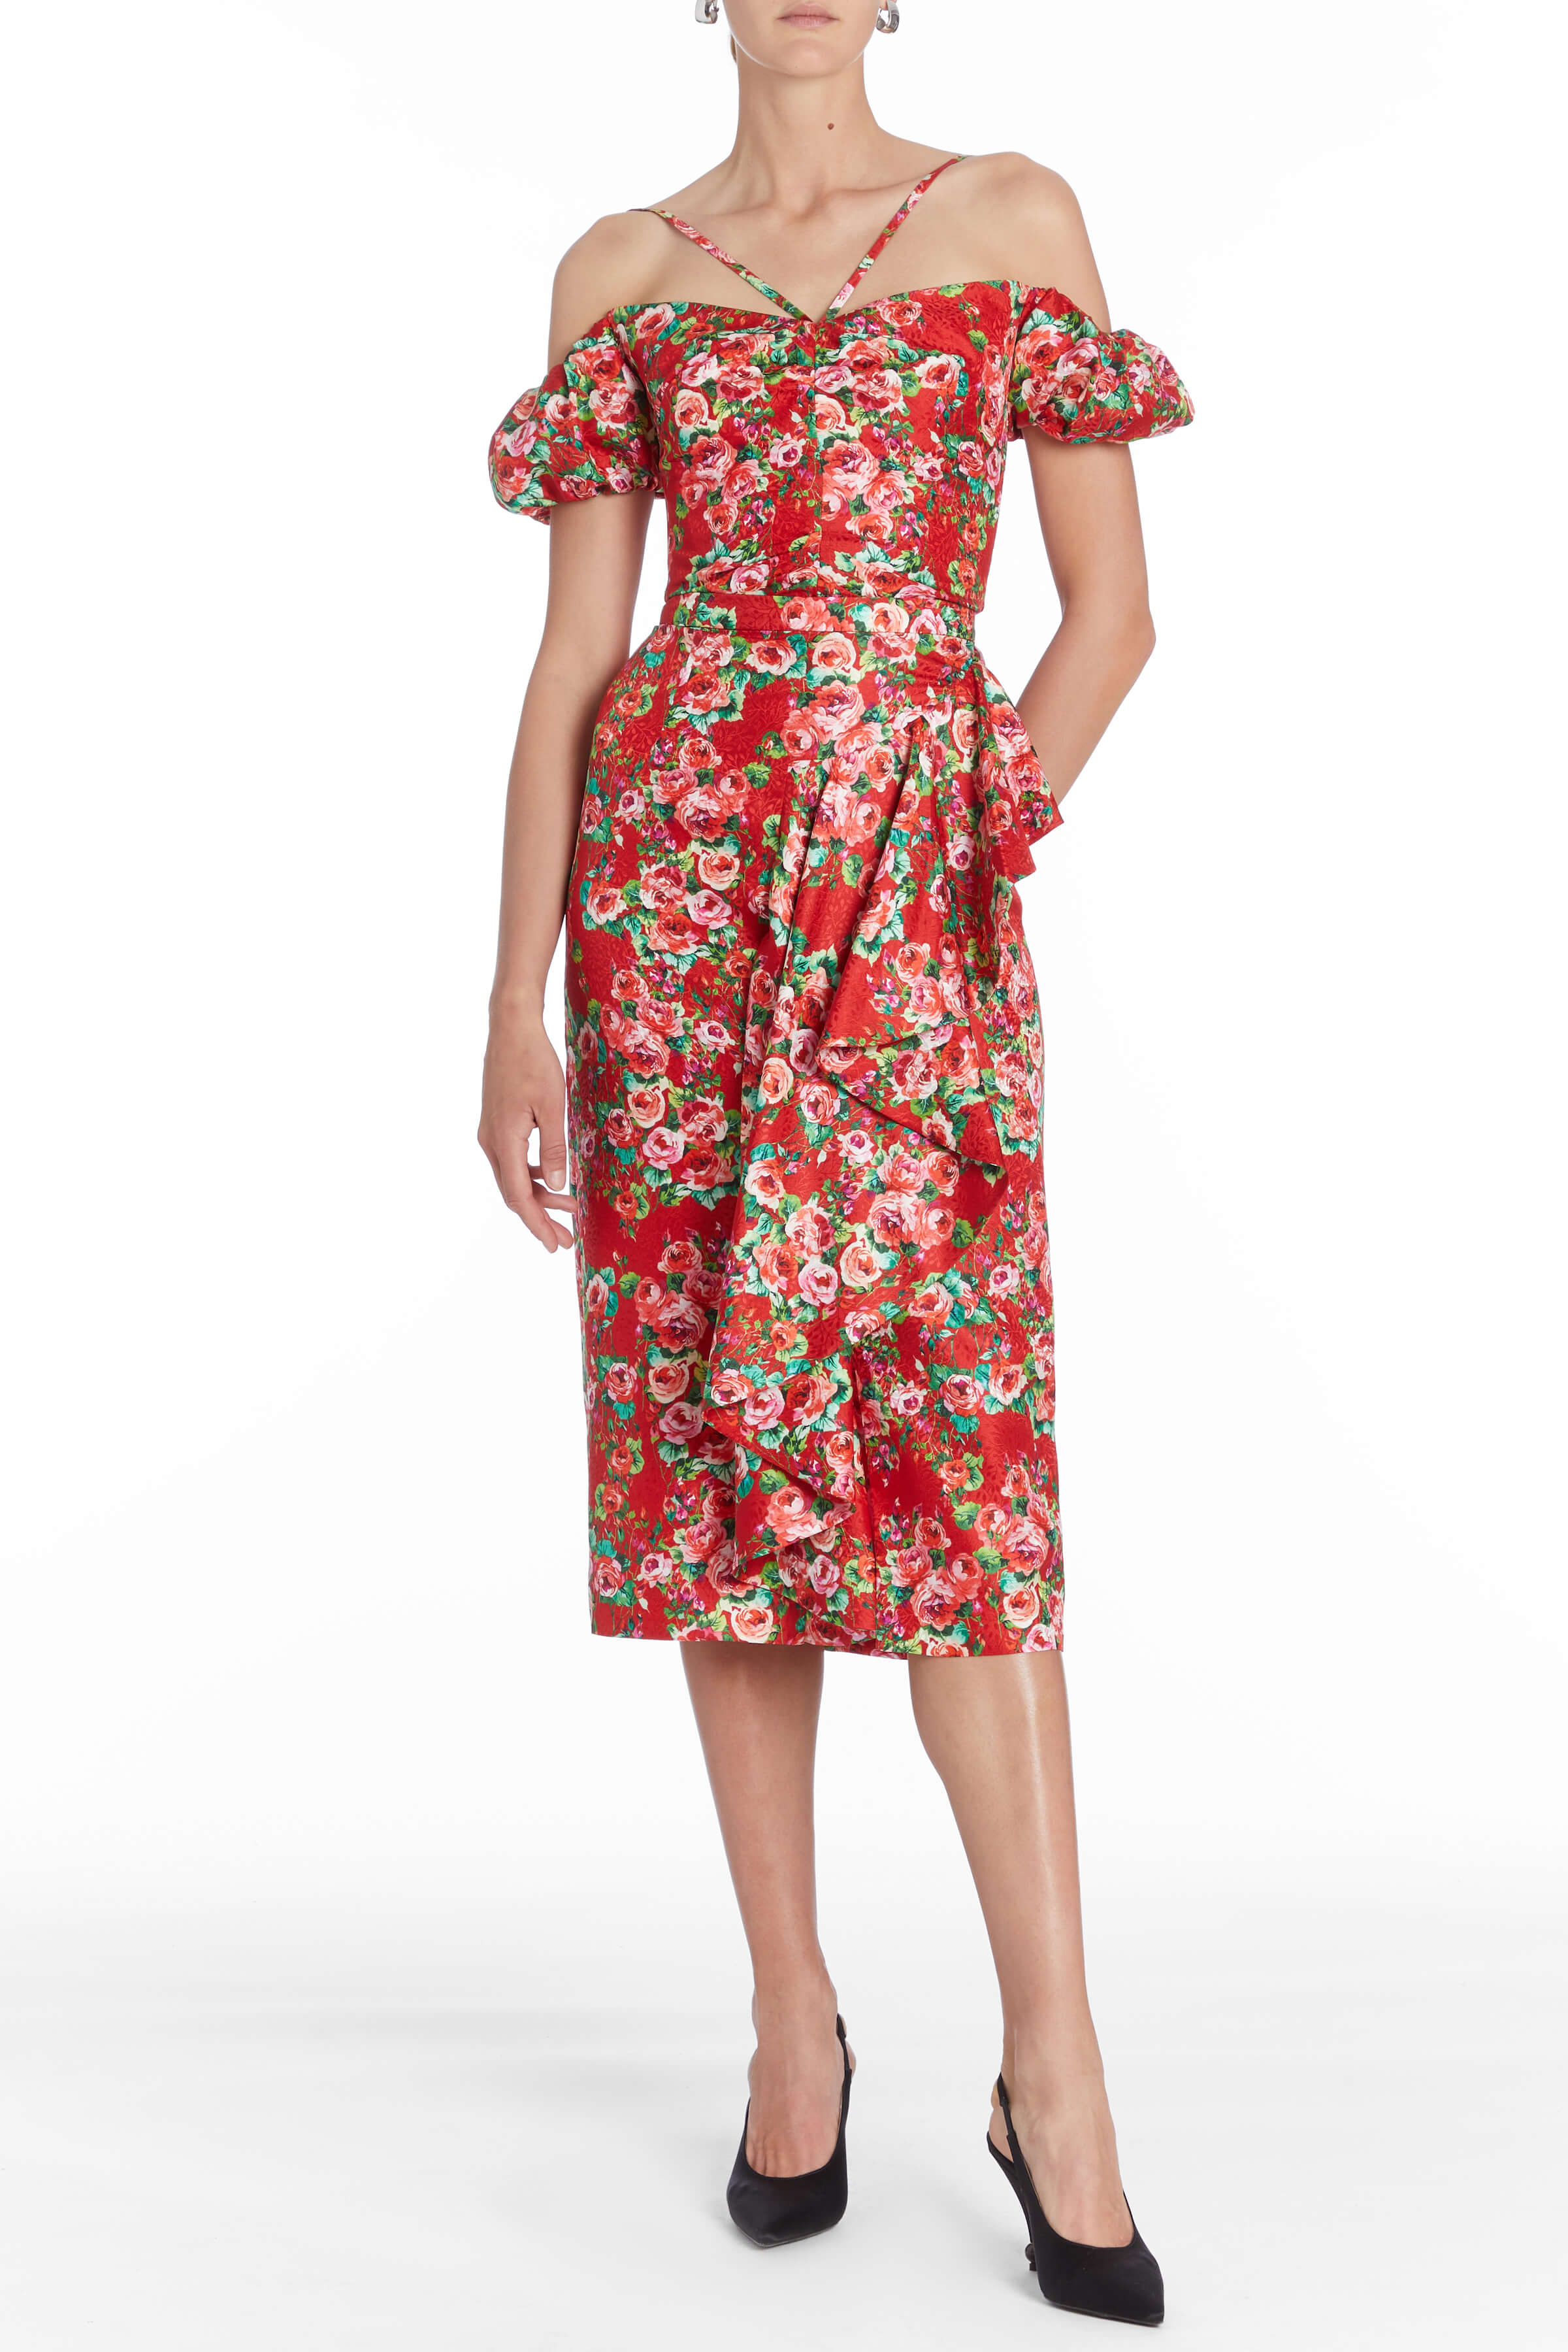 Shirley Red Rose Floral Ruffle Midi Skirt